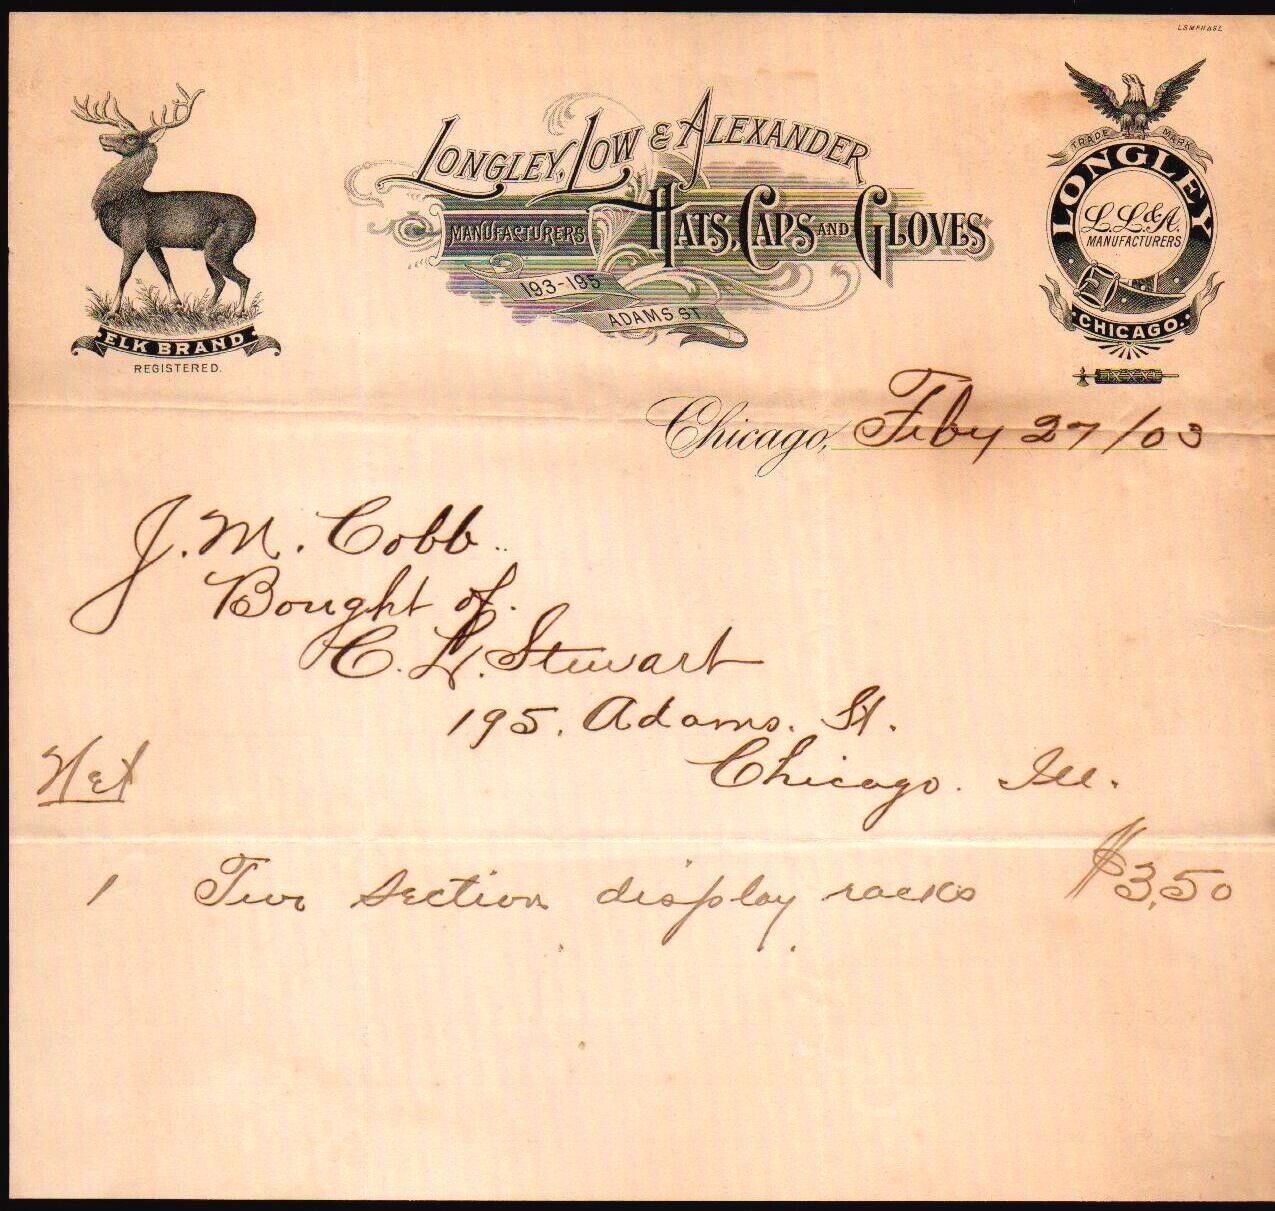 1903 Chicago - Longley Low & Alexander - Hats Caps Gloves - Letter Head Bill